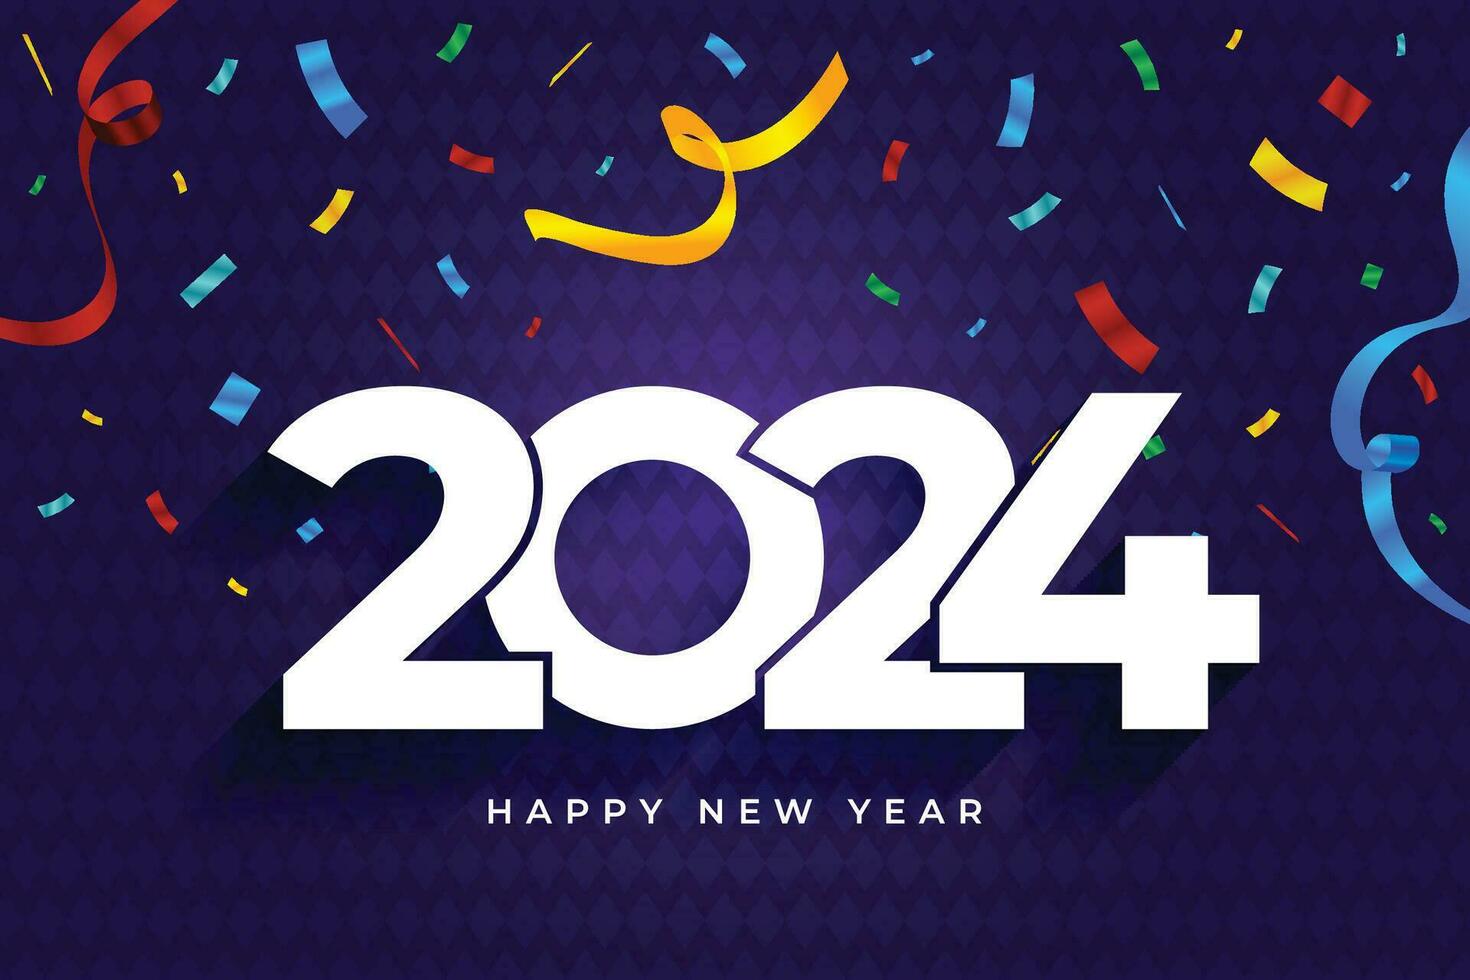 Happy new year 2023 square template with 3D hanging number. Greeting concept for 2023 new year celebration vector